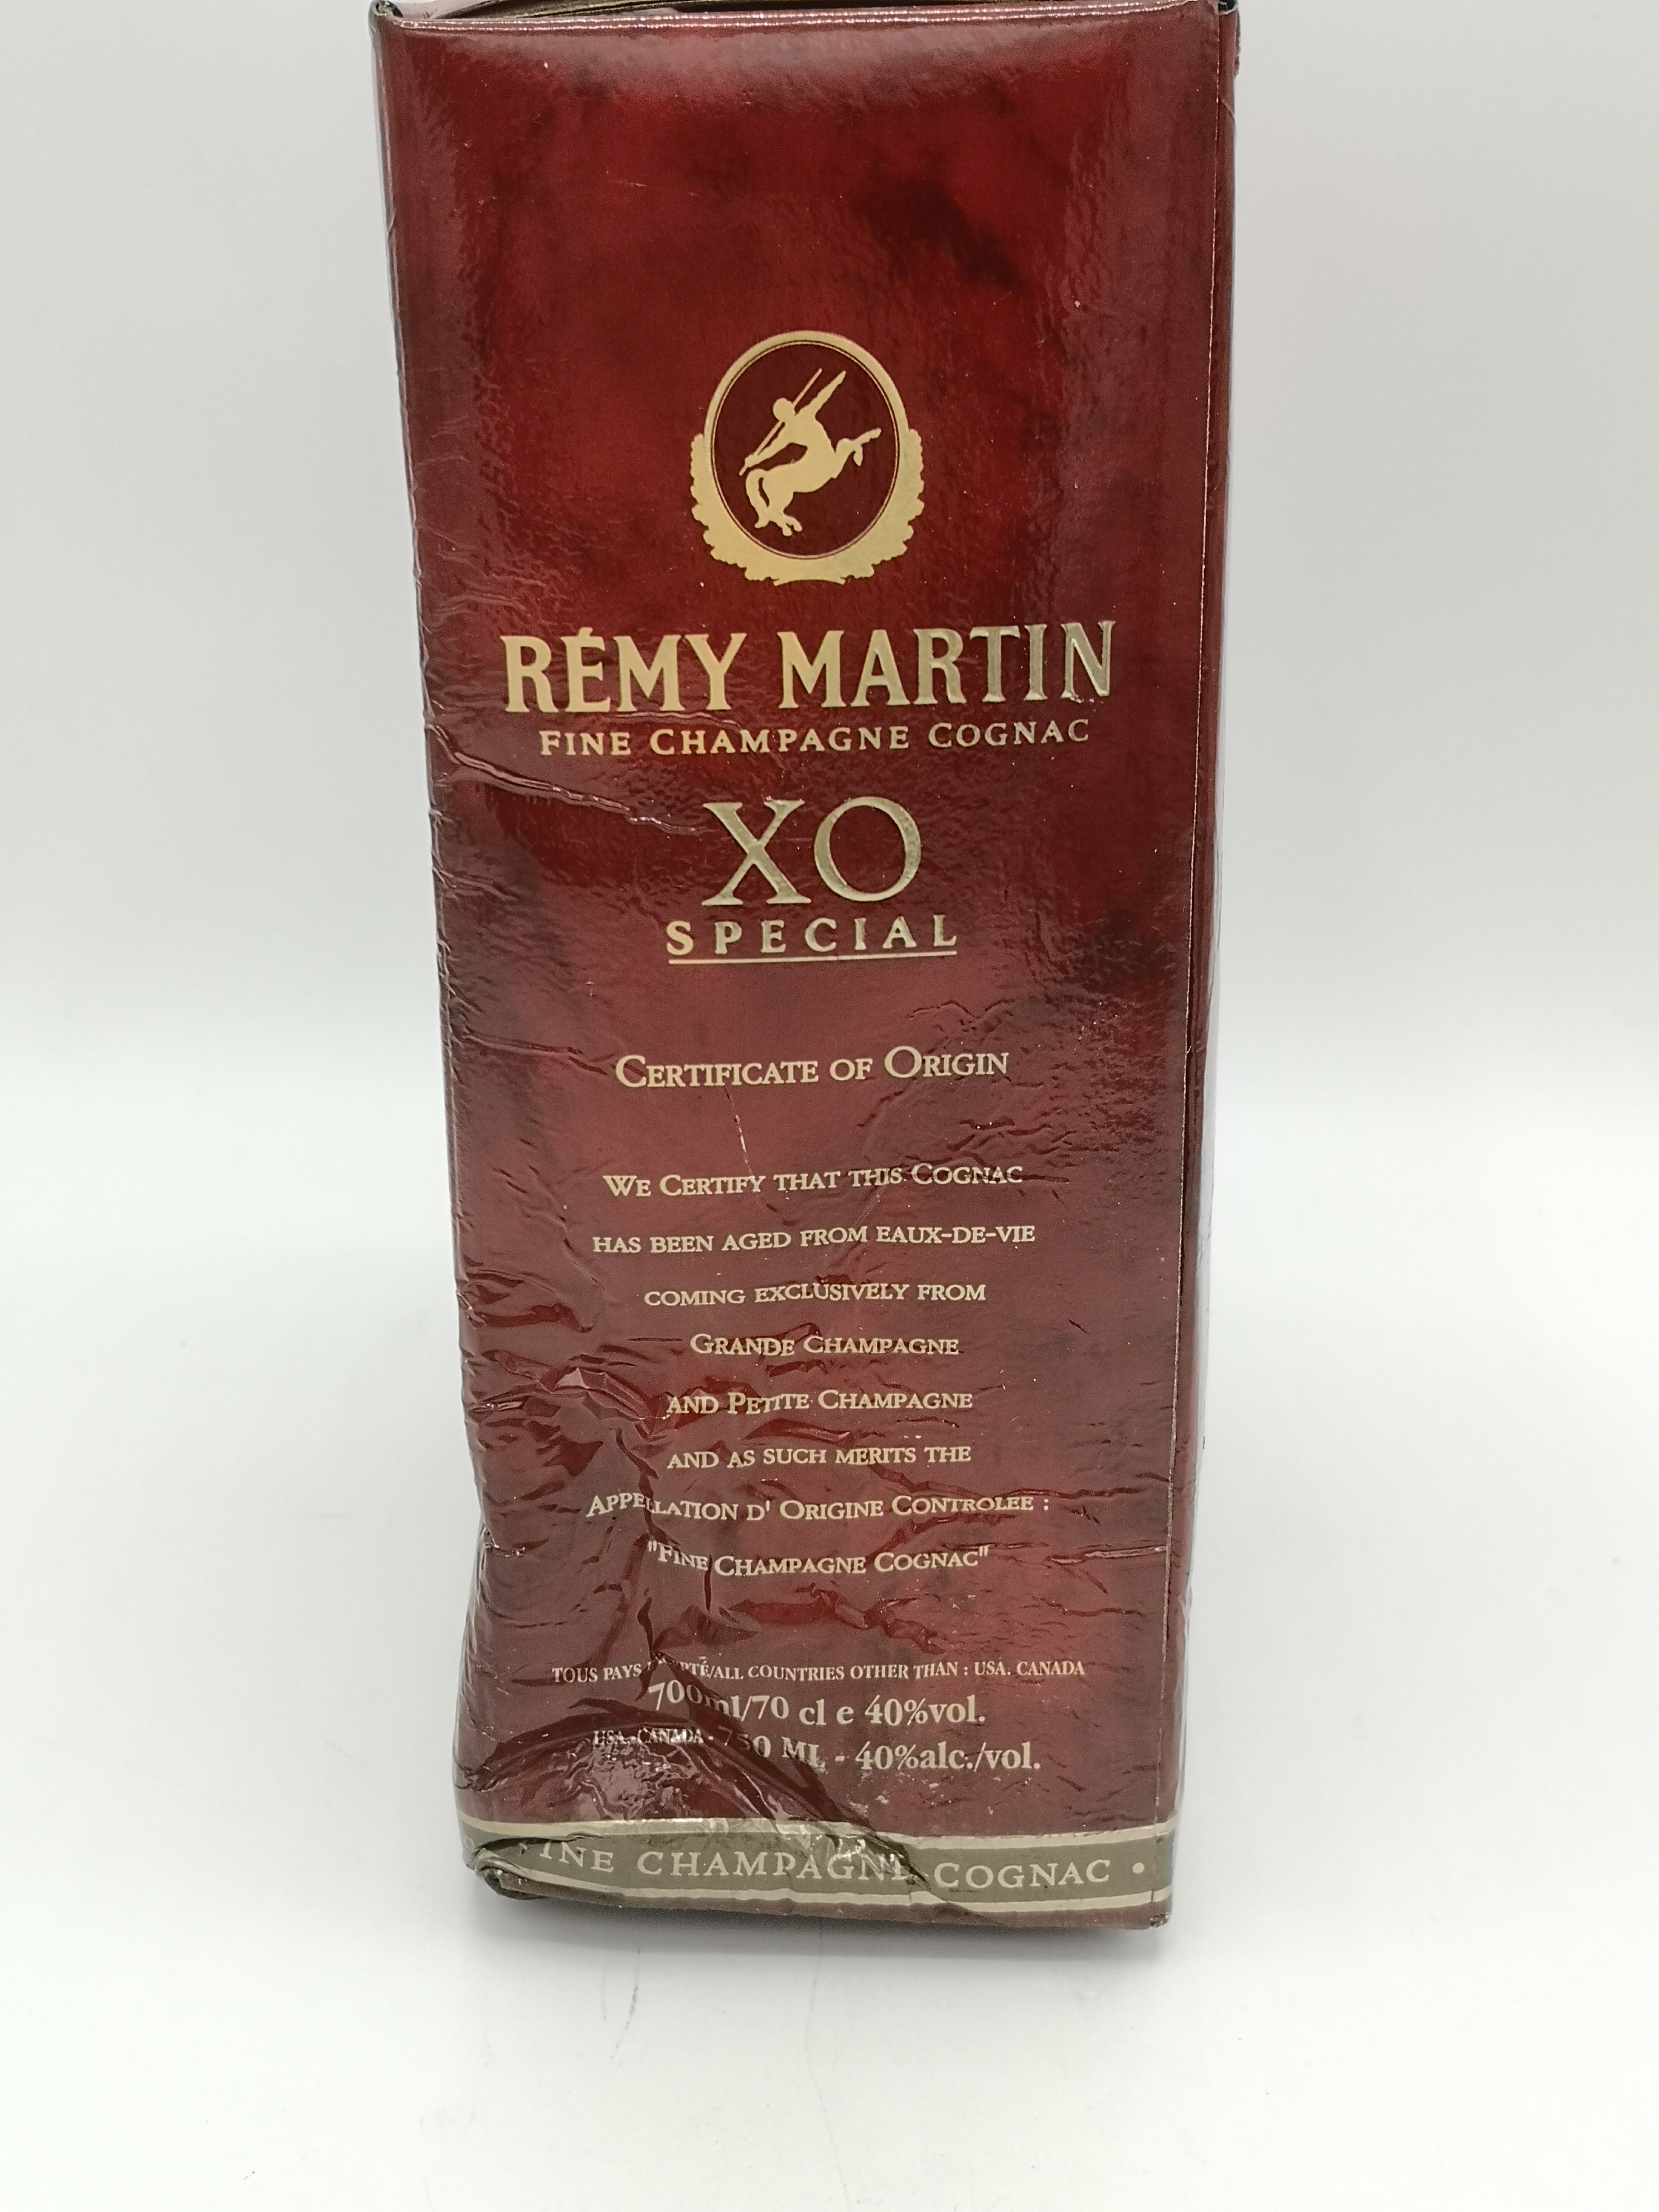 70cl bottle of Remy Martin XO special cognac - Image 9 of 10